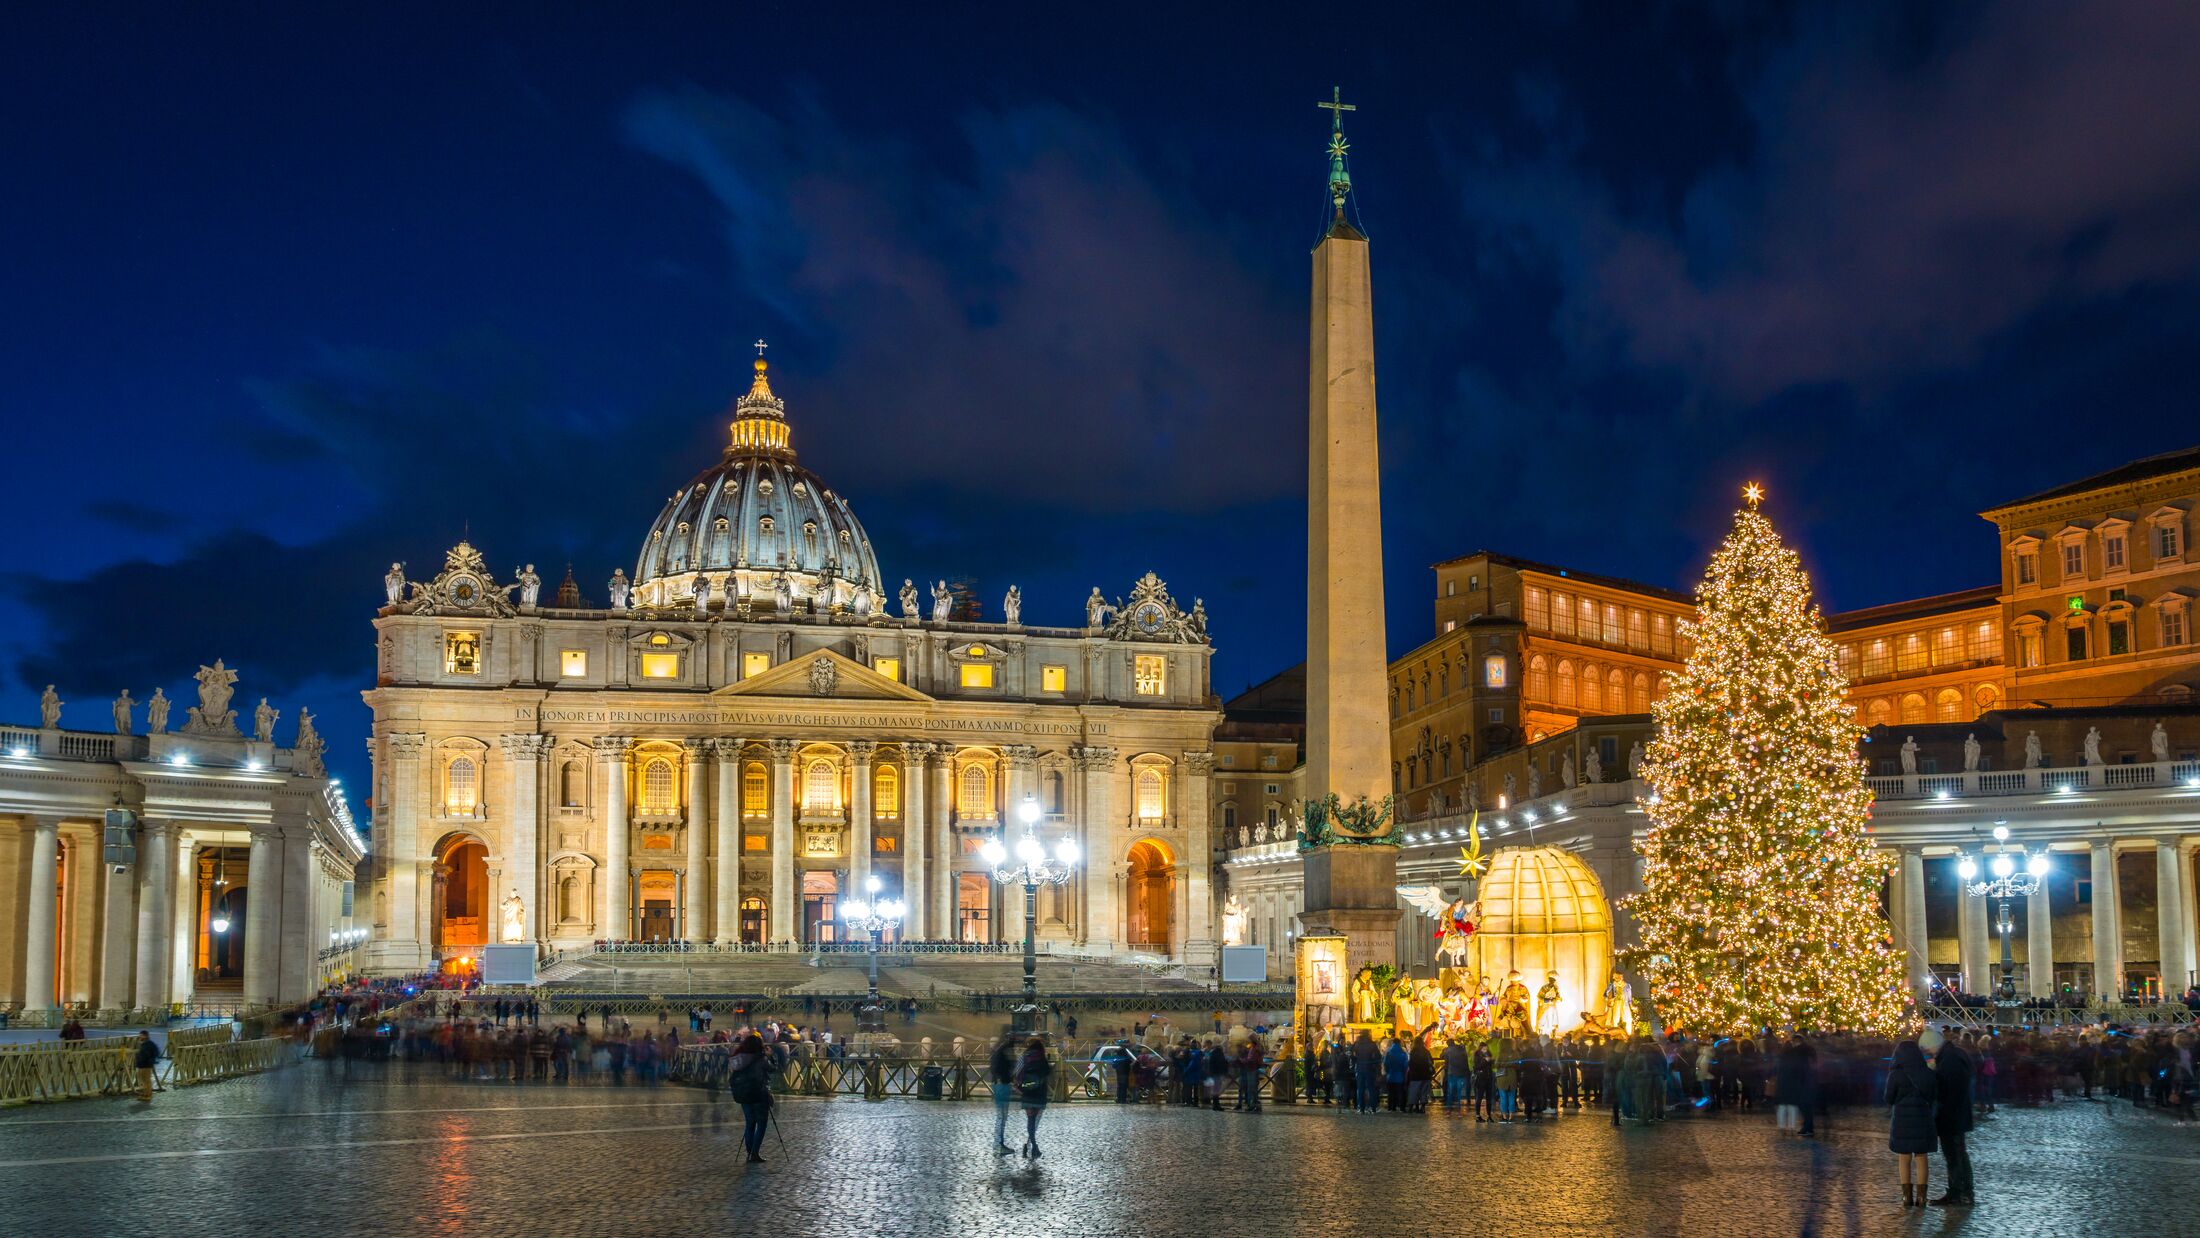 Saint Peter Basilica in Rome during Christmas time. Italy.